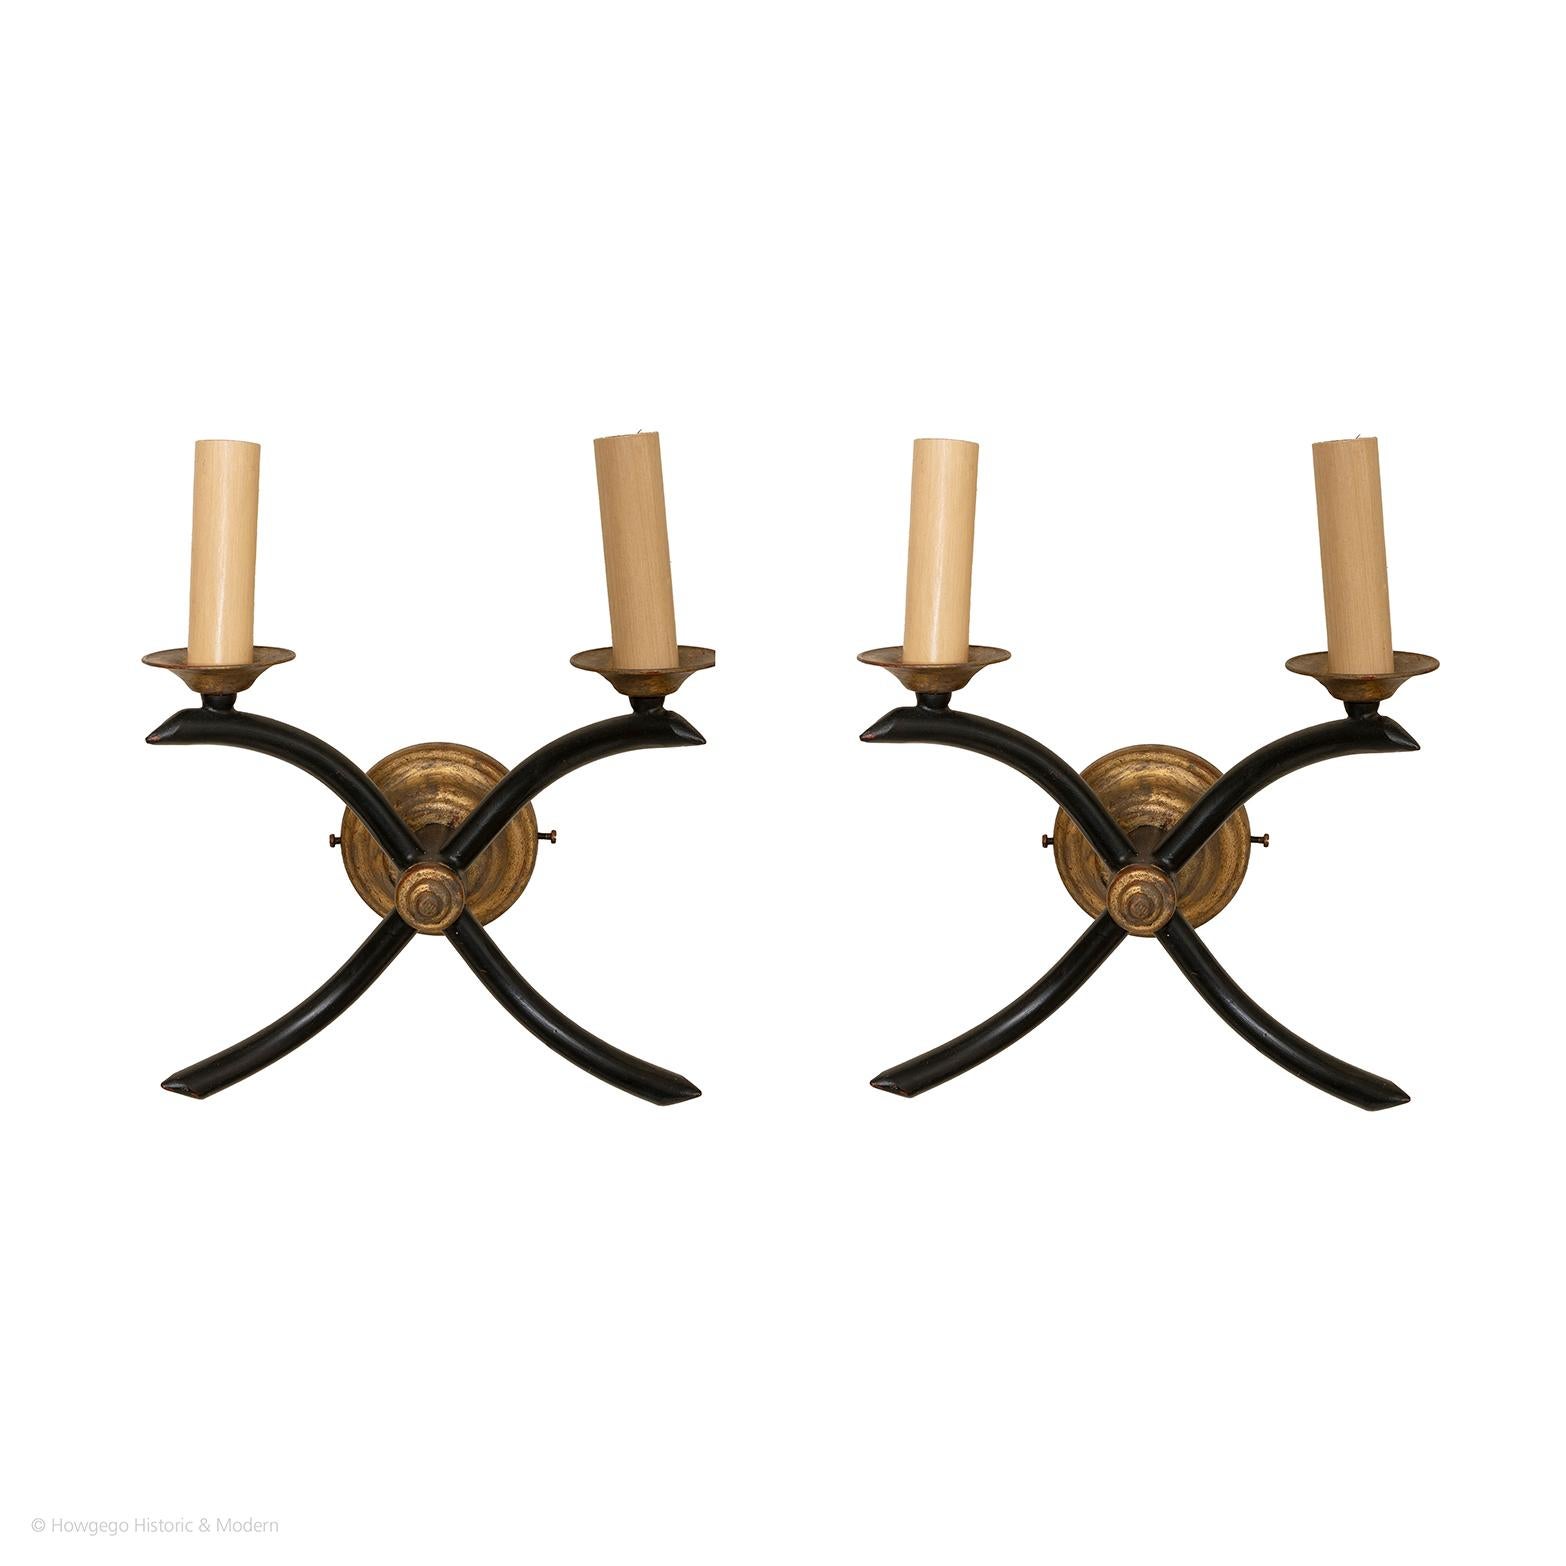 A PAIR OF VINTAGE, EMPIRE STYLE, GILDED & BLACK METAL WALL SCONCES, WITH TWO ARMS

- Striking, simple form accentuated by the contrast between the gilding and the black palette
- They blend and sit comfortably in period , modern and contemporary